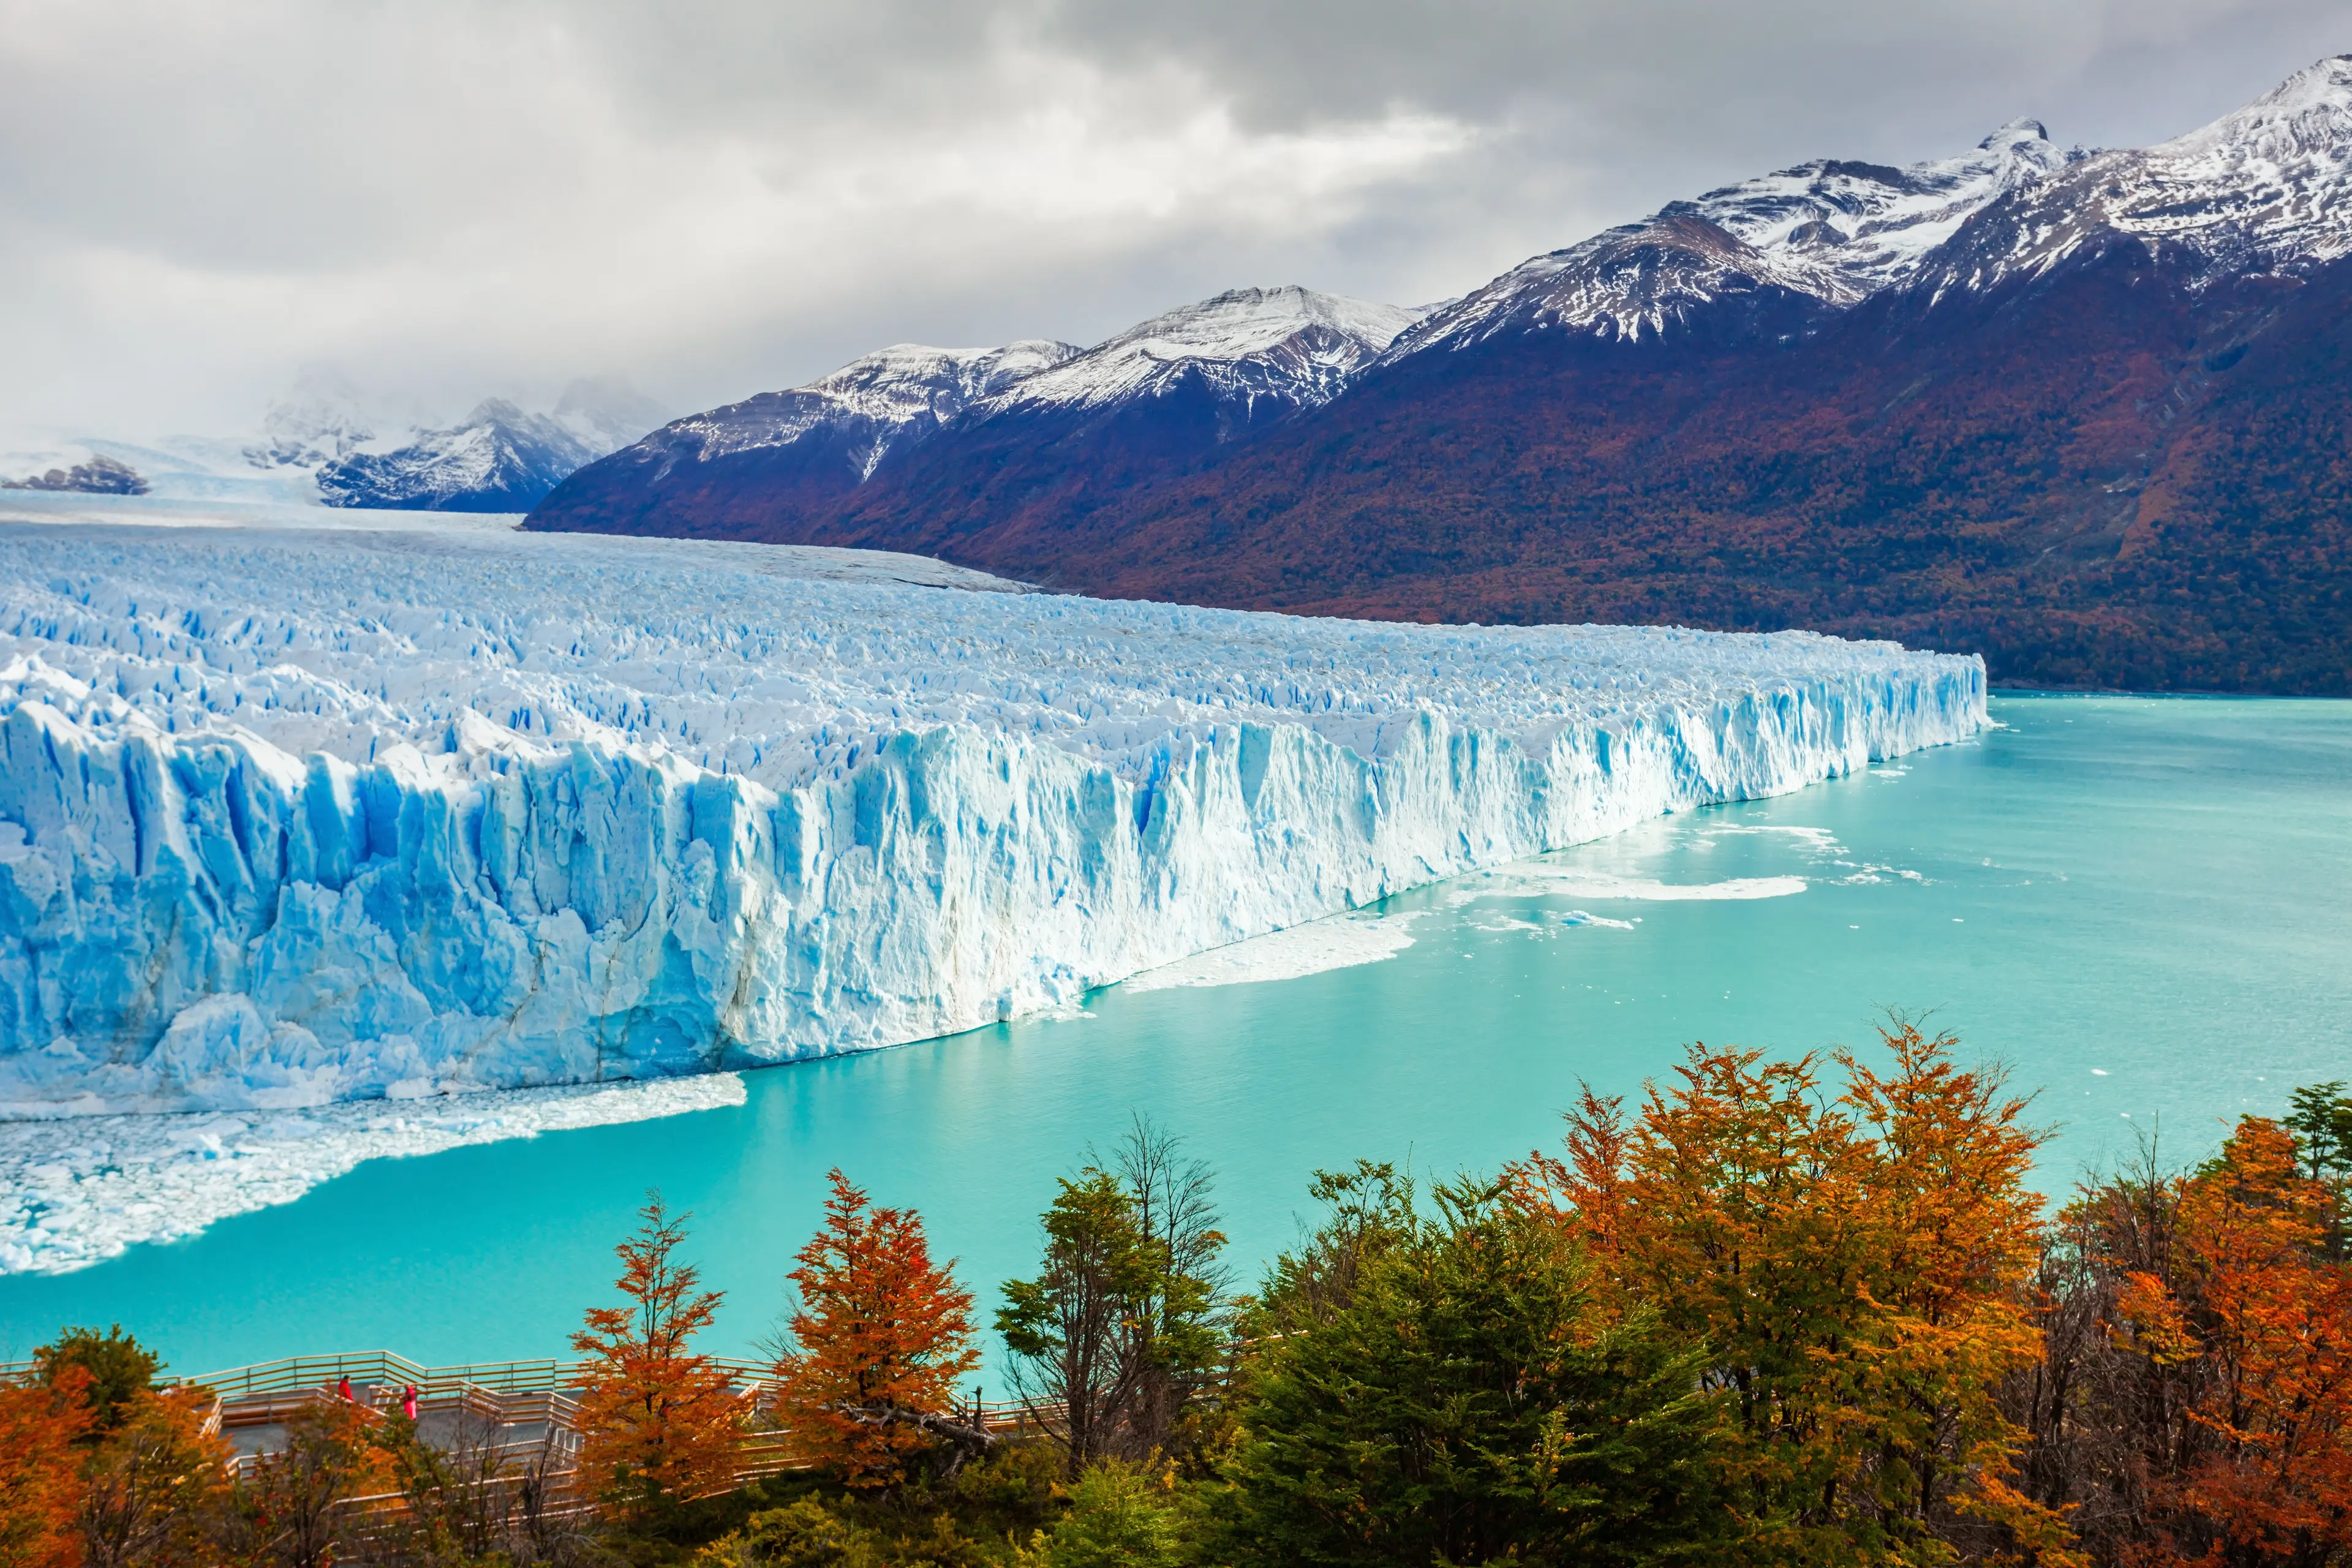 6-Day Adventure, Sightseeing & Relaxation Journey in Argentine Patagonia